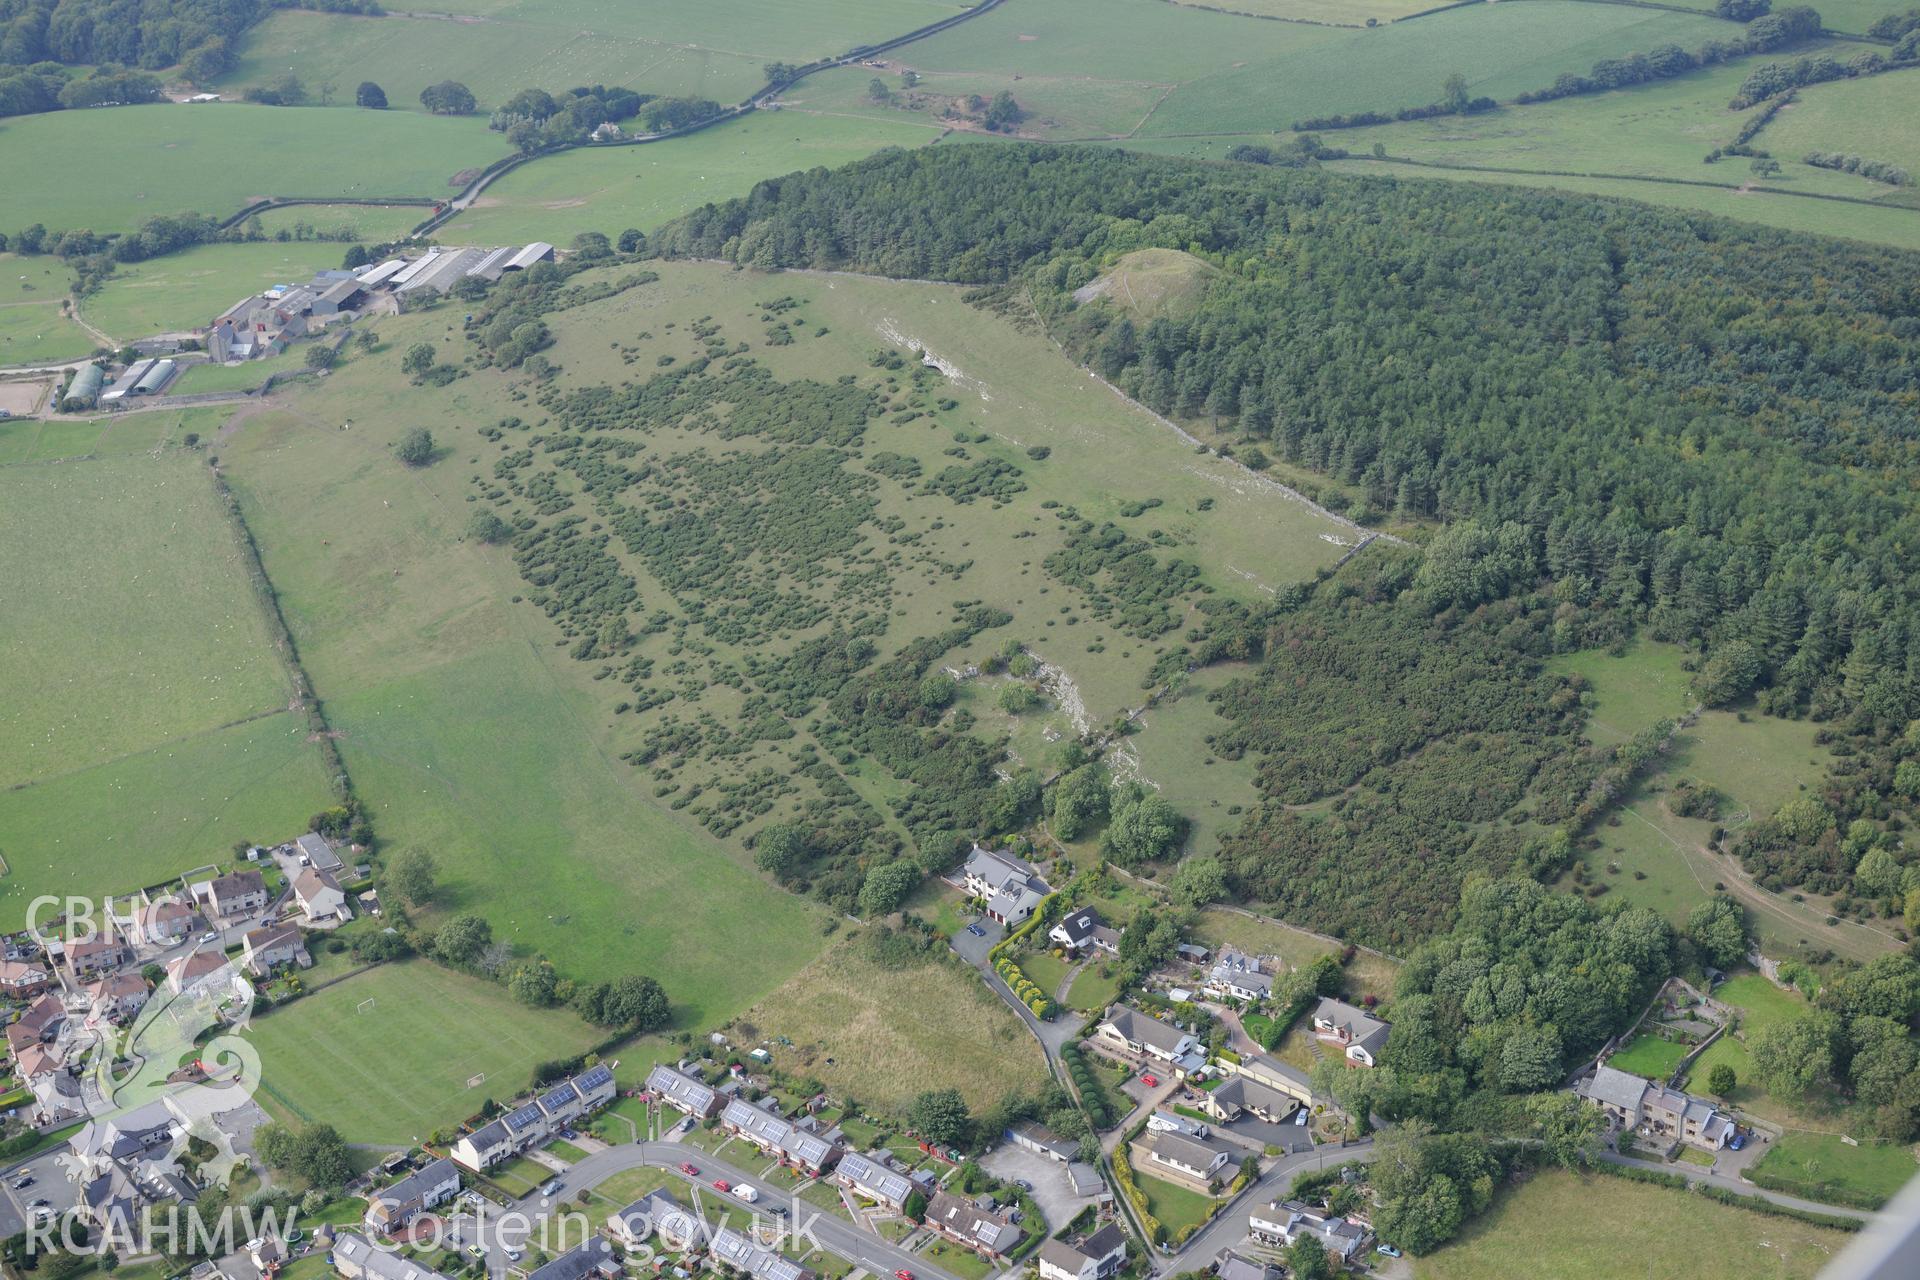 Gop Farm and Gop Hill cairn, Trelawnyd, near St. Asaph. Oblique aerial photograph taken during the Royal Commission's programme of archaeological aerial reconnaissance by Toby Driver on 11th September 2015.